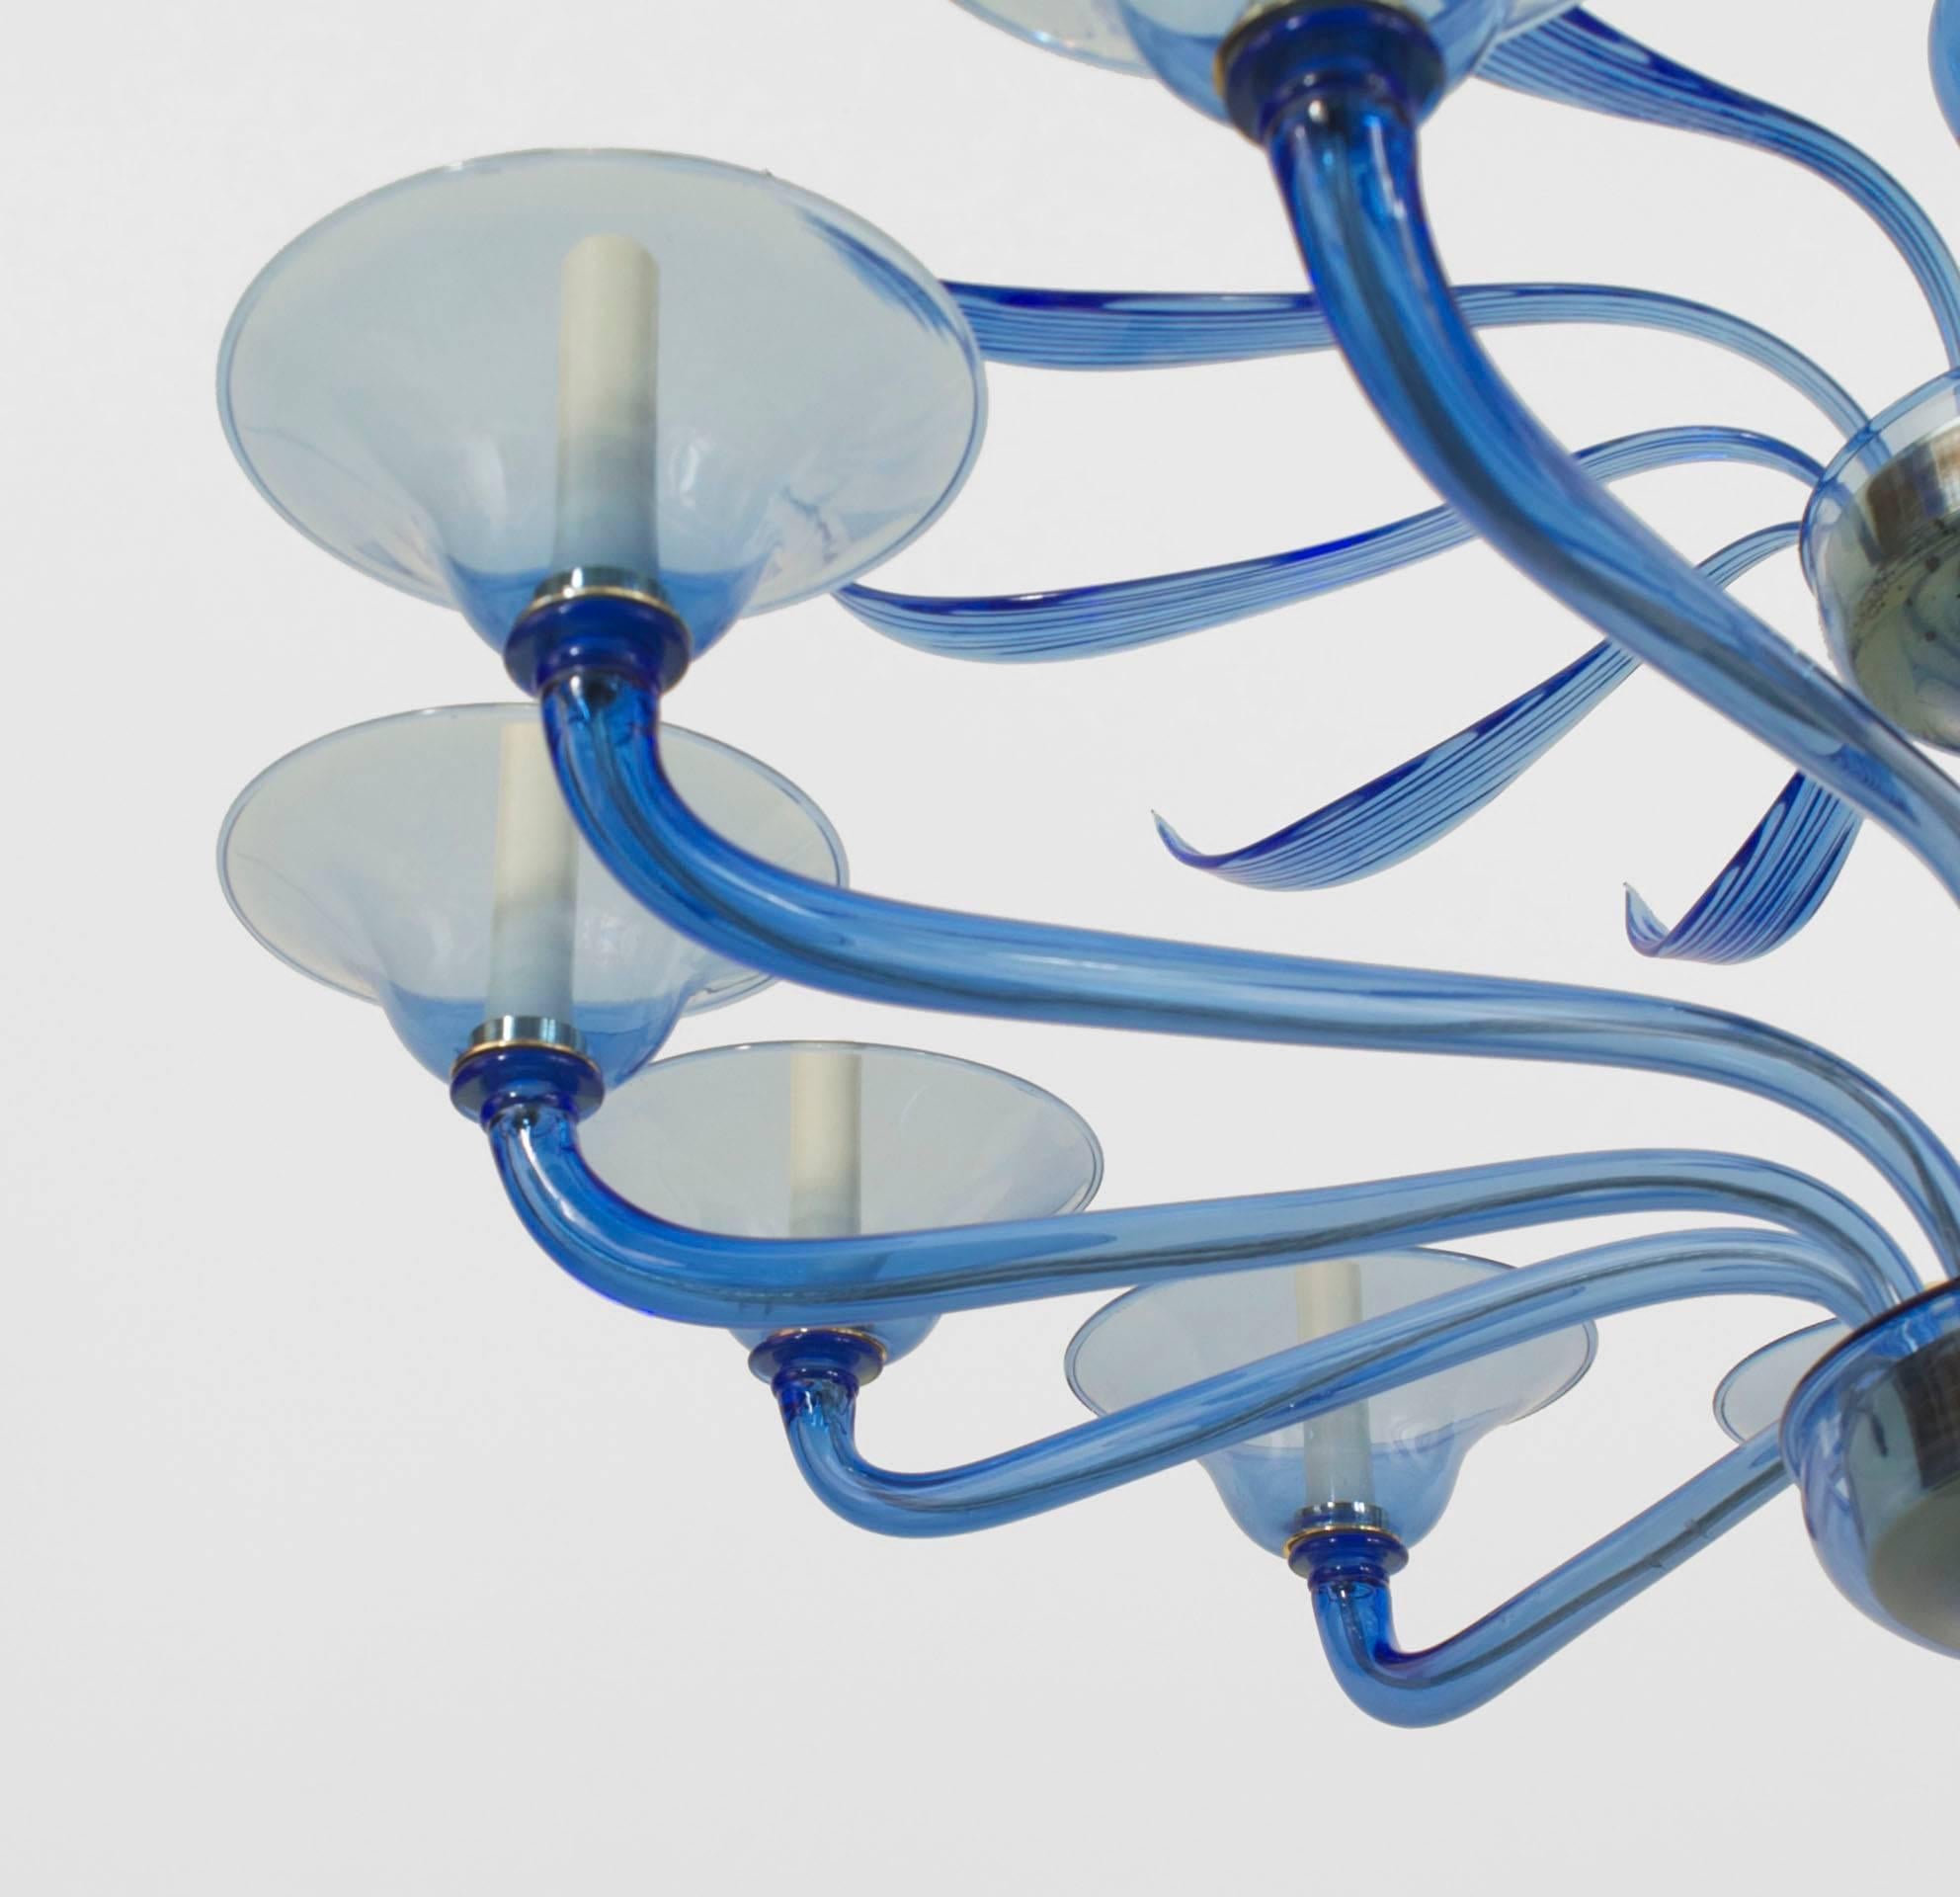 Italian Venetian Murano 1940s style (modern) blue glass chandelier with 12 scroll arms under a tier of 12 fluted feathers emanating from a centre shaft with a final bottom (Murano maker decal).

       